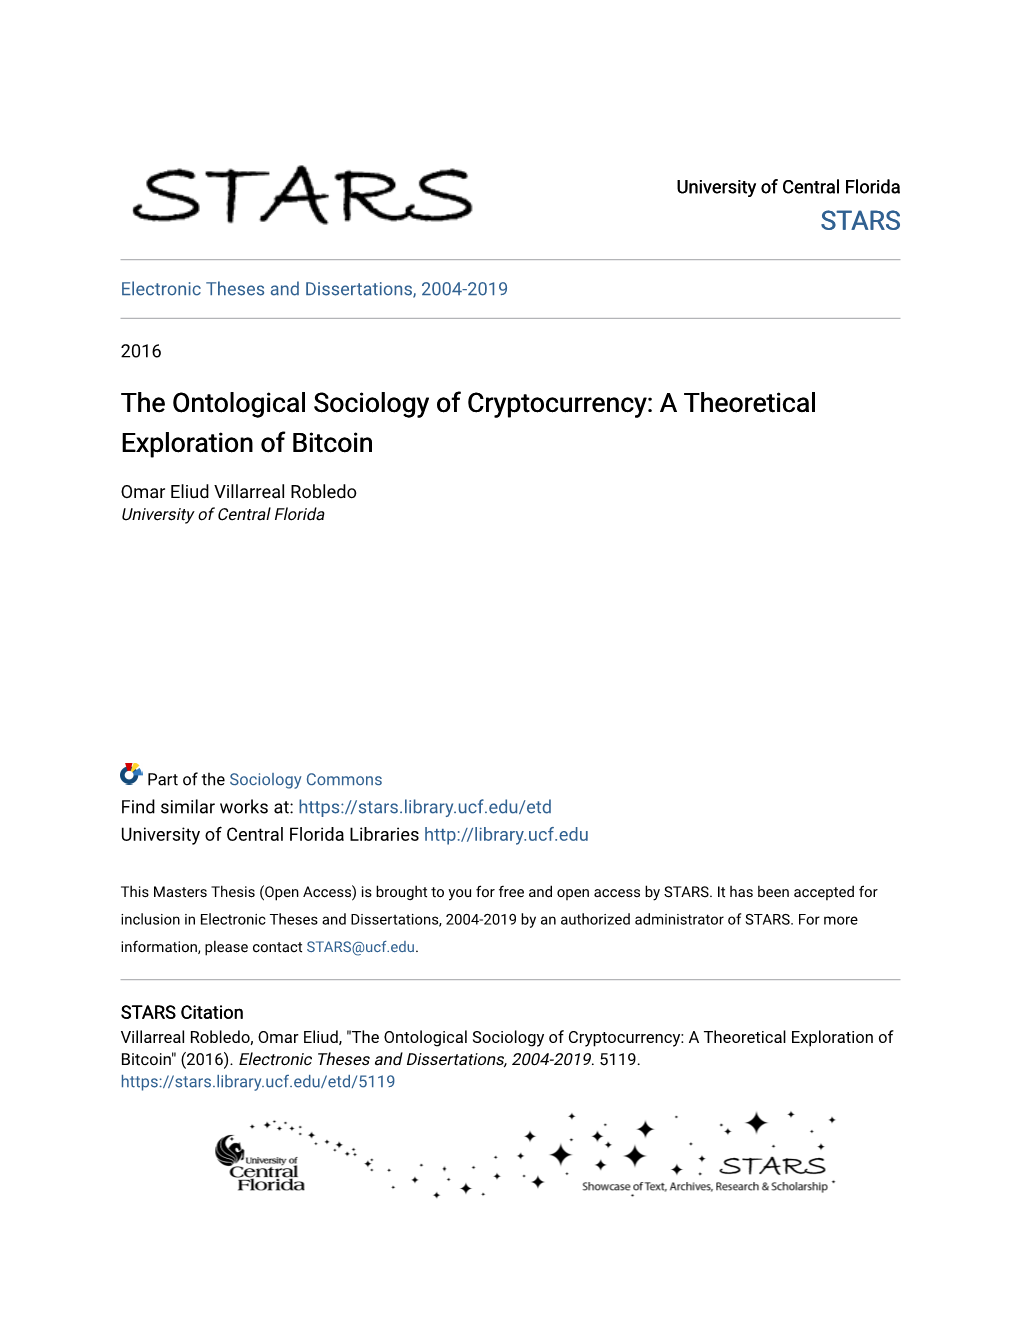 The Ontological Sociology of Cryptocurrency: a Theoretical Exploration of Bitcoin